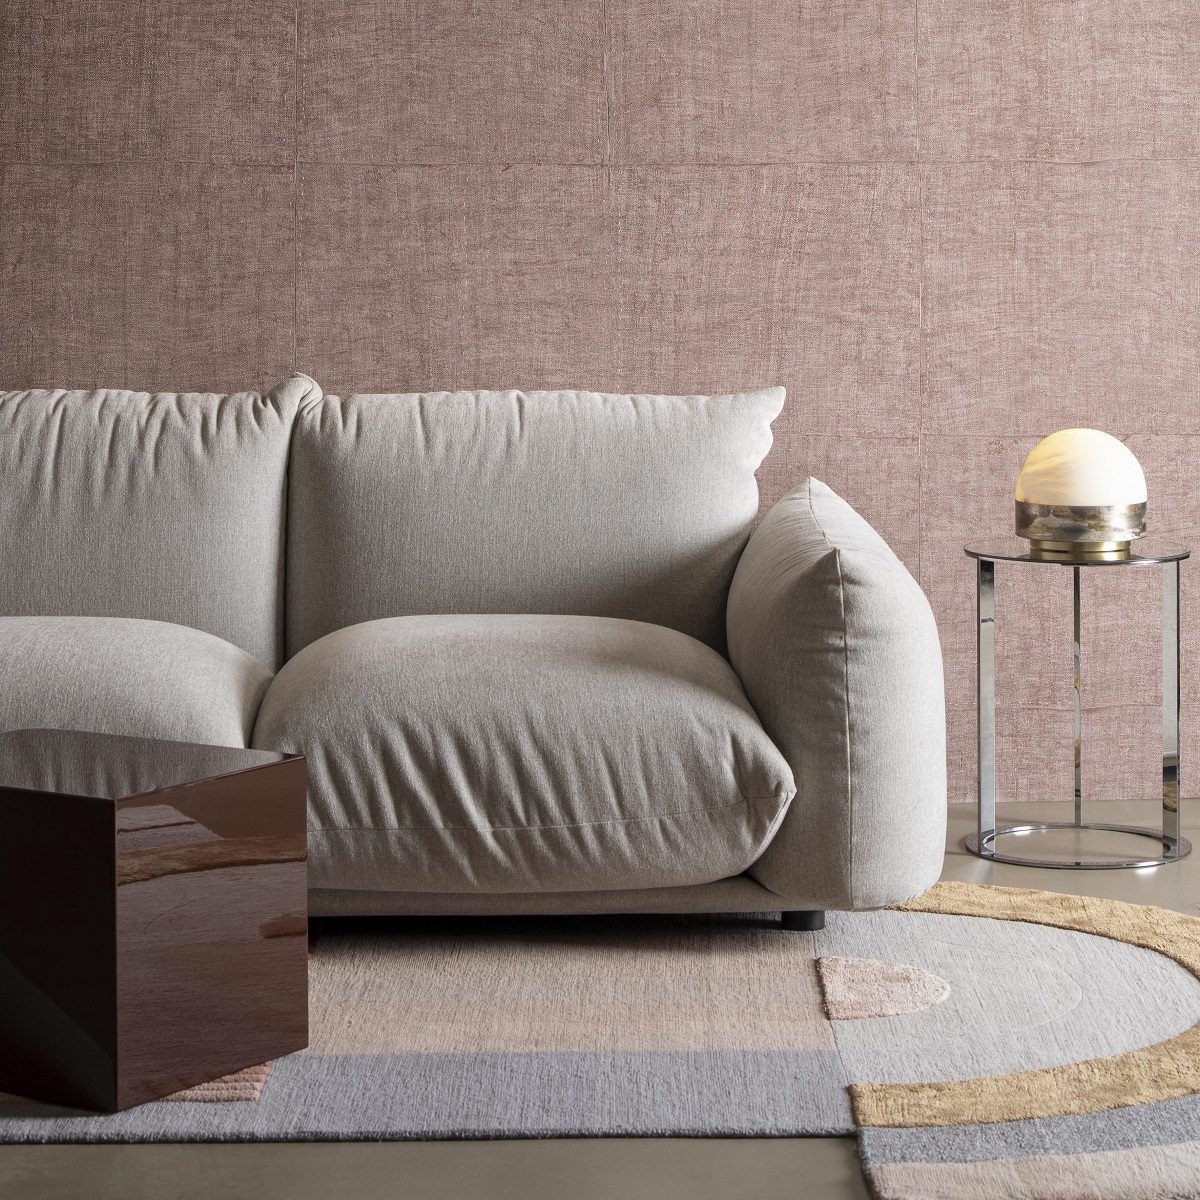 cream couch on abstract patterned carpet with textured Arte wallcovering behind